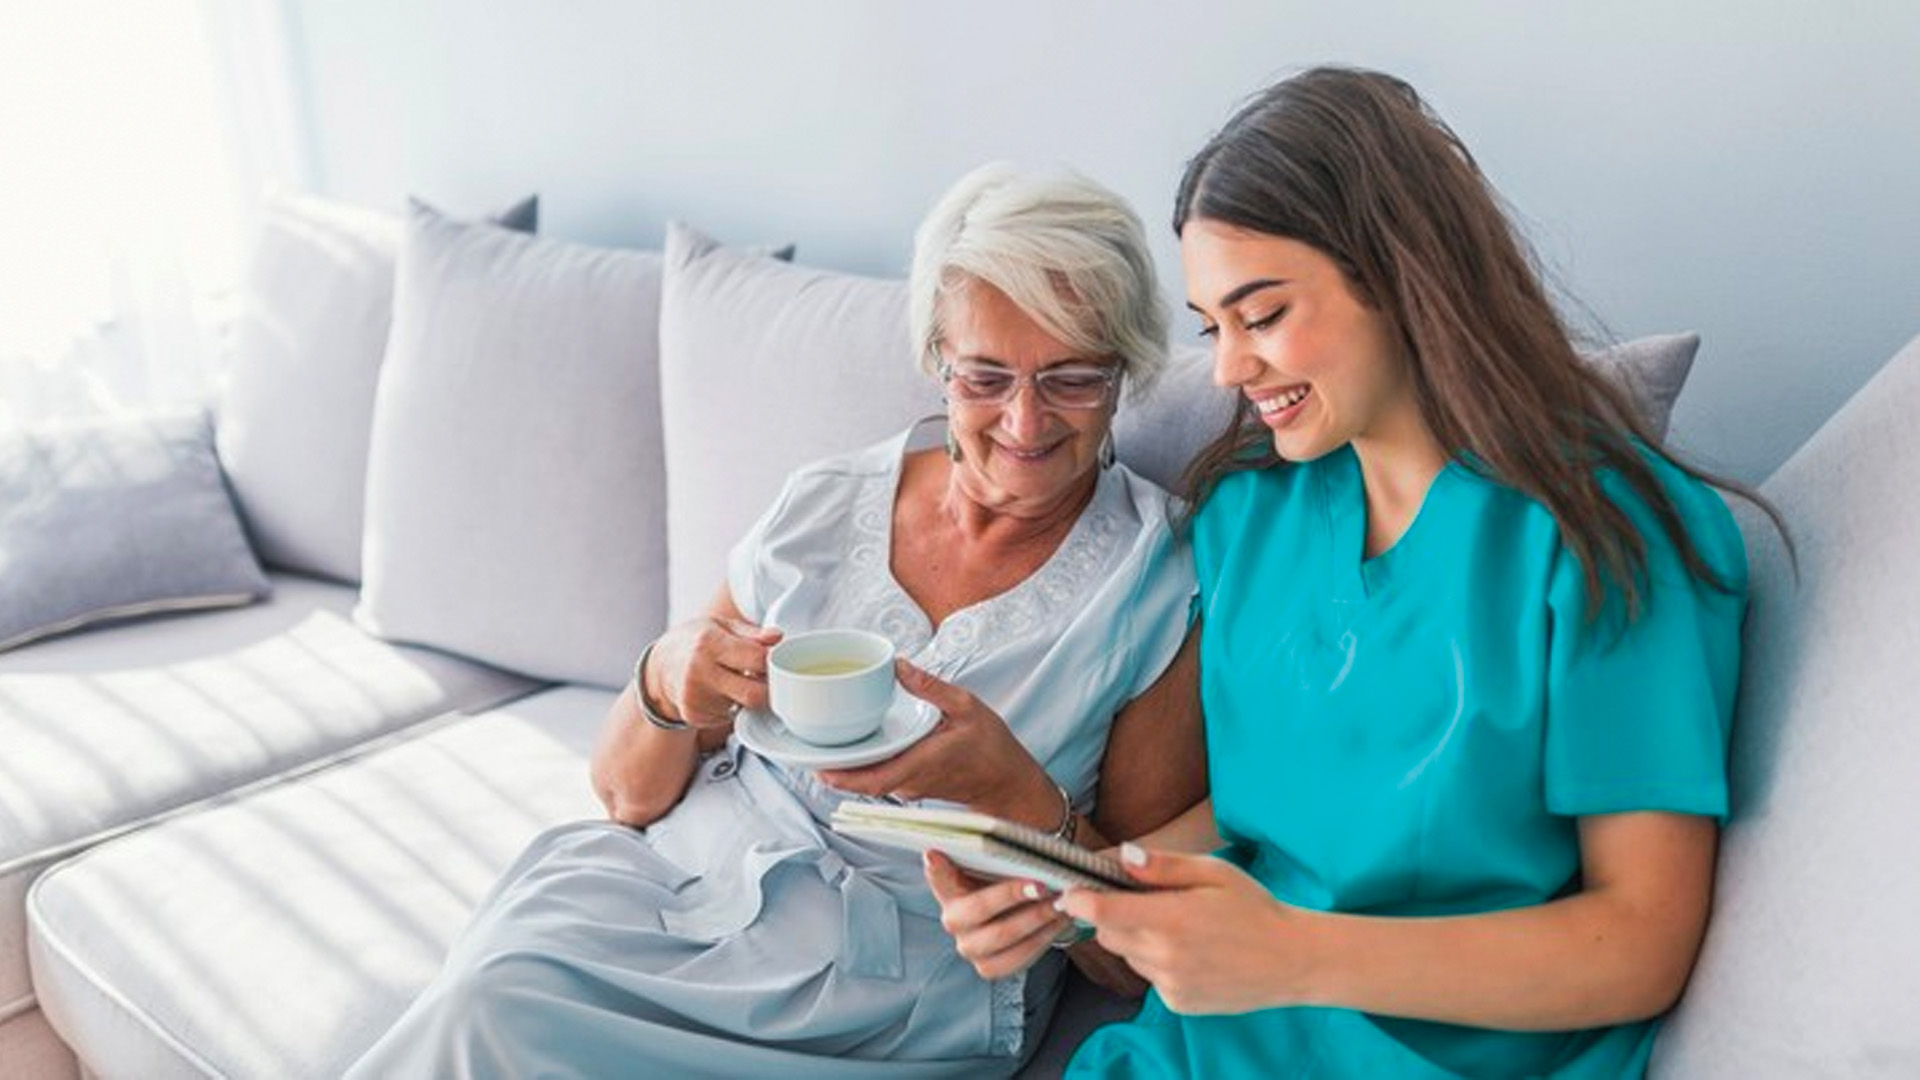 Your Elderly Loved One’s In-Home Care Could Cost Nothing!